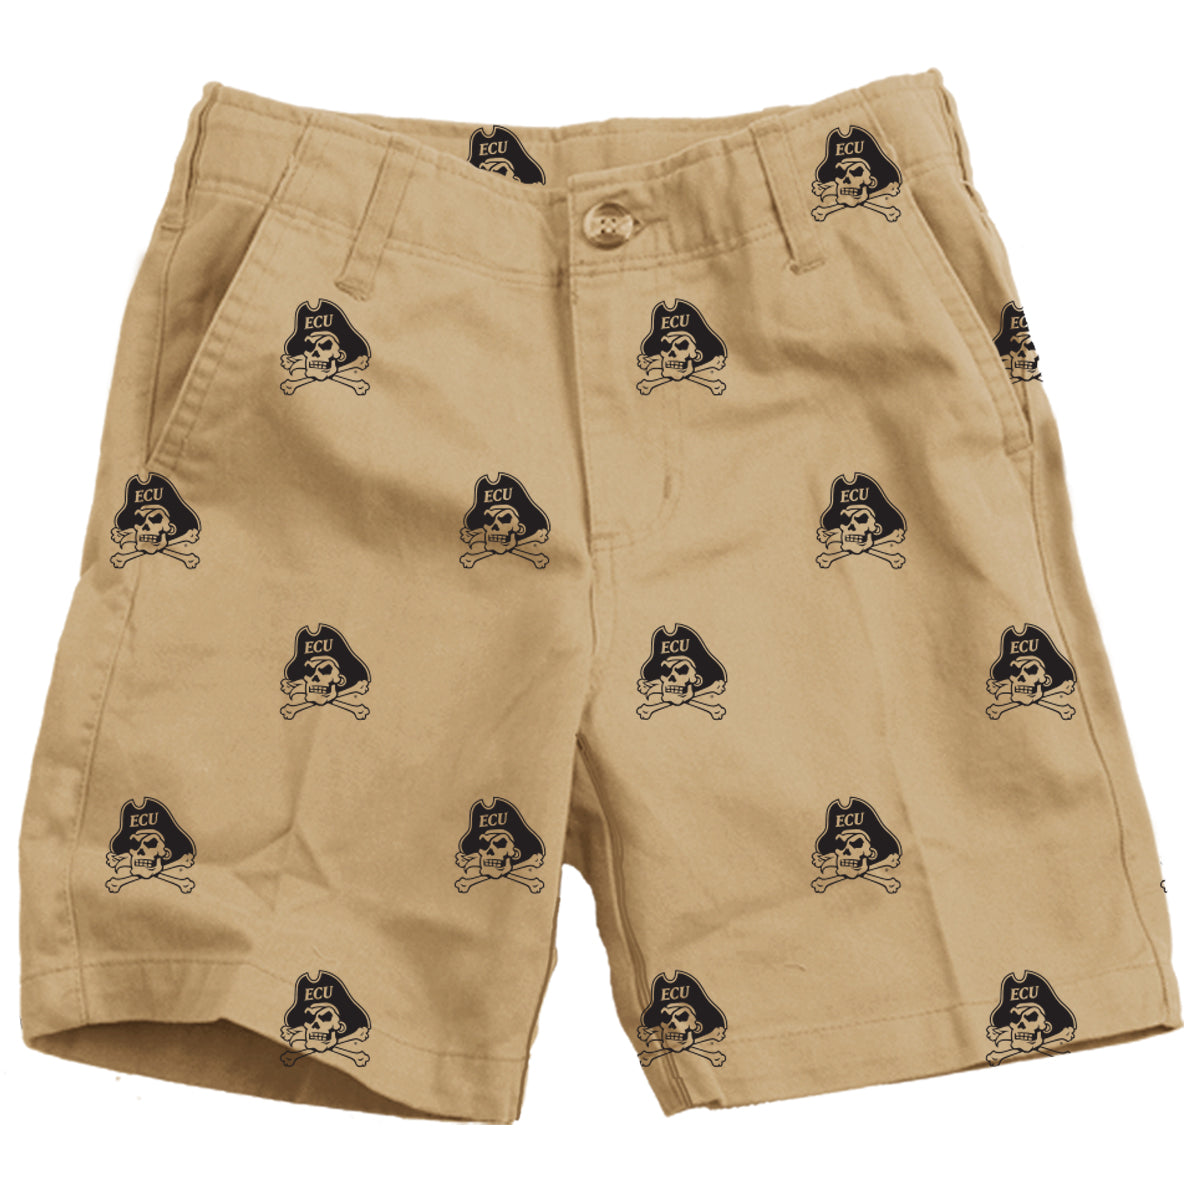 Wes & Willy ECU Pirates Boy's Embroidered Twill Short